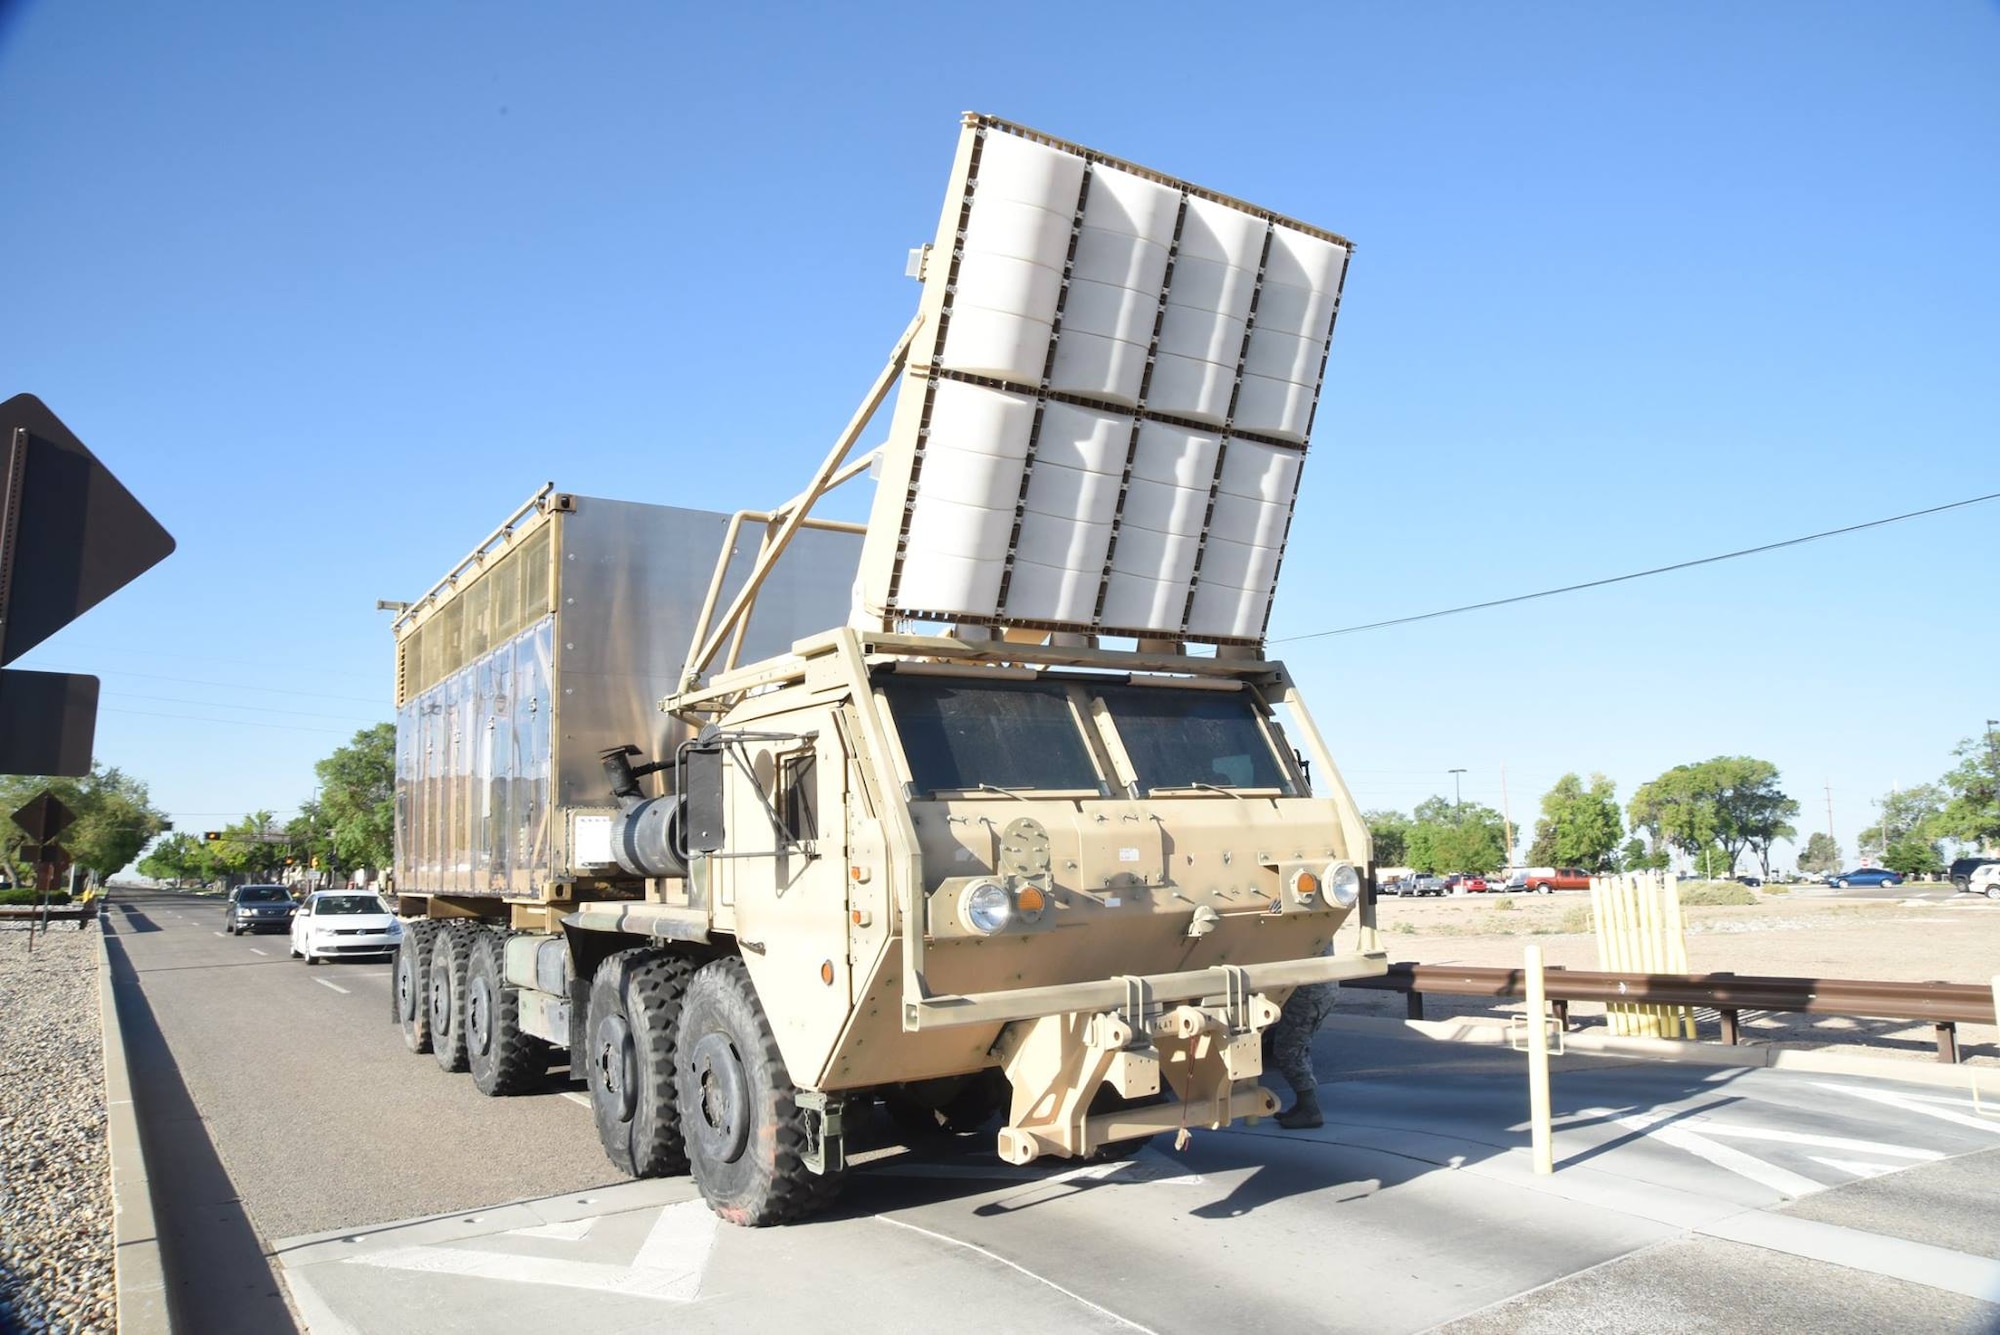 MAX POWER drives out the Carlisle gate of Kirtland Air Force Base, May 16, 2017. The program will transfer to the US Army’s Armament Research, Development and Engineering Center, or ARDEC, headquartered at Picatinny Arsenal, N.J.  ARDEC will continue R&D on MAX POWER locally however, at New Mexico Tech’s Energetic Materials Research and Testing Center near Socorro. (U.S. Air Force Photo/Senior Airman Chandler Baker)